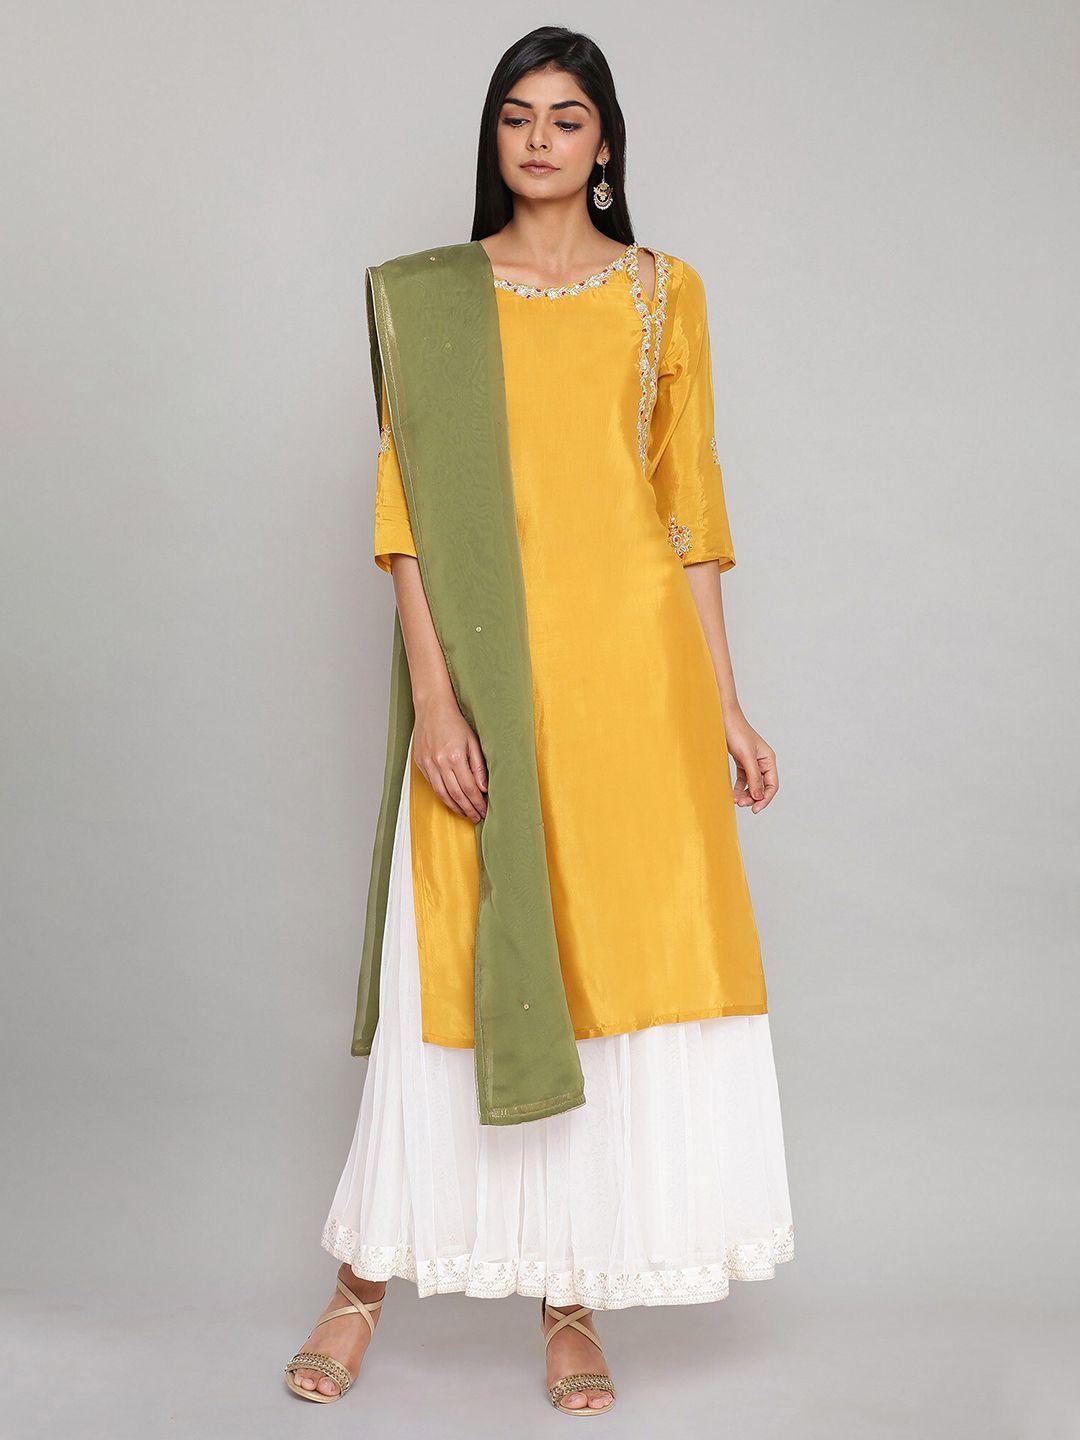 WISHFUL Green & Gold-Toned Dupatta with Sequinned